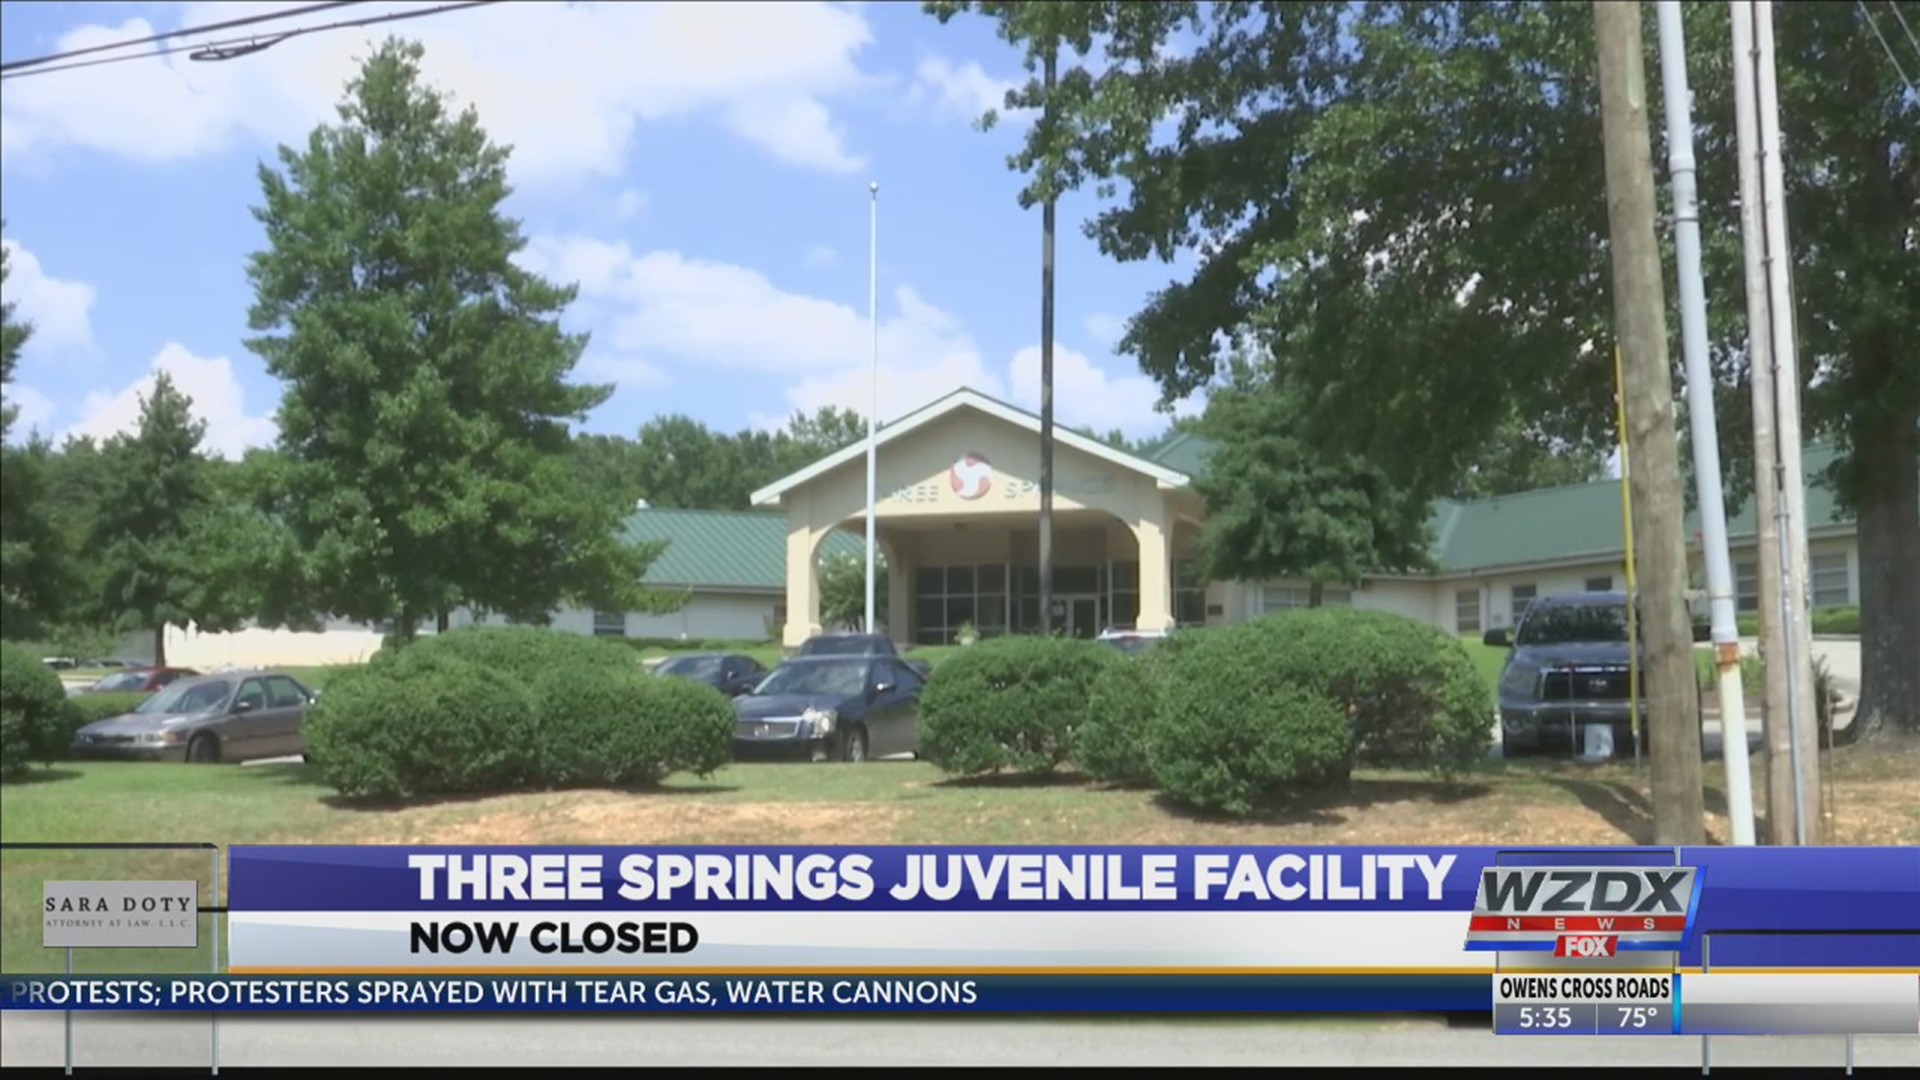 The facility that housed 51 students is now closed in Madison.